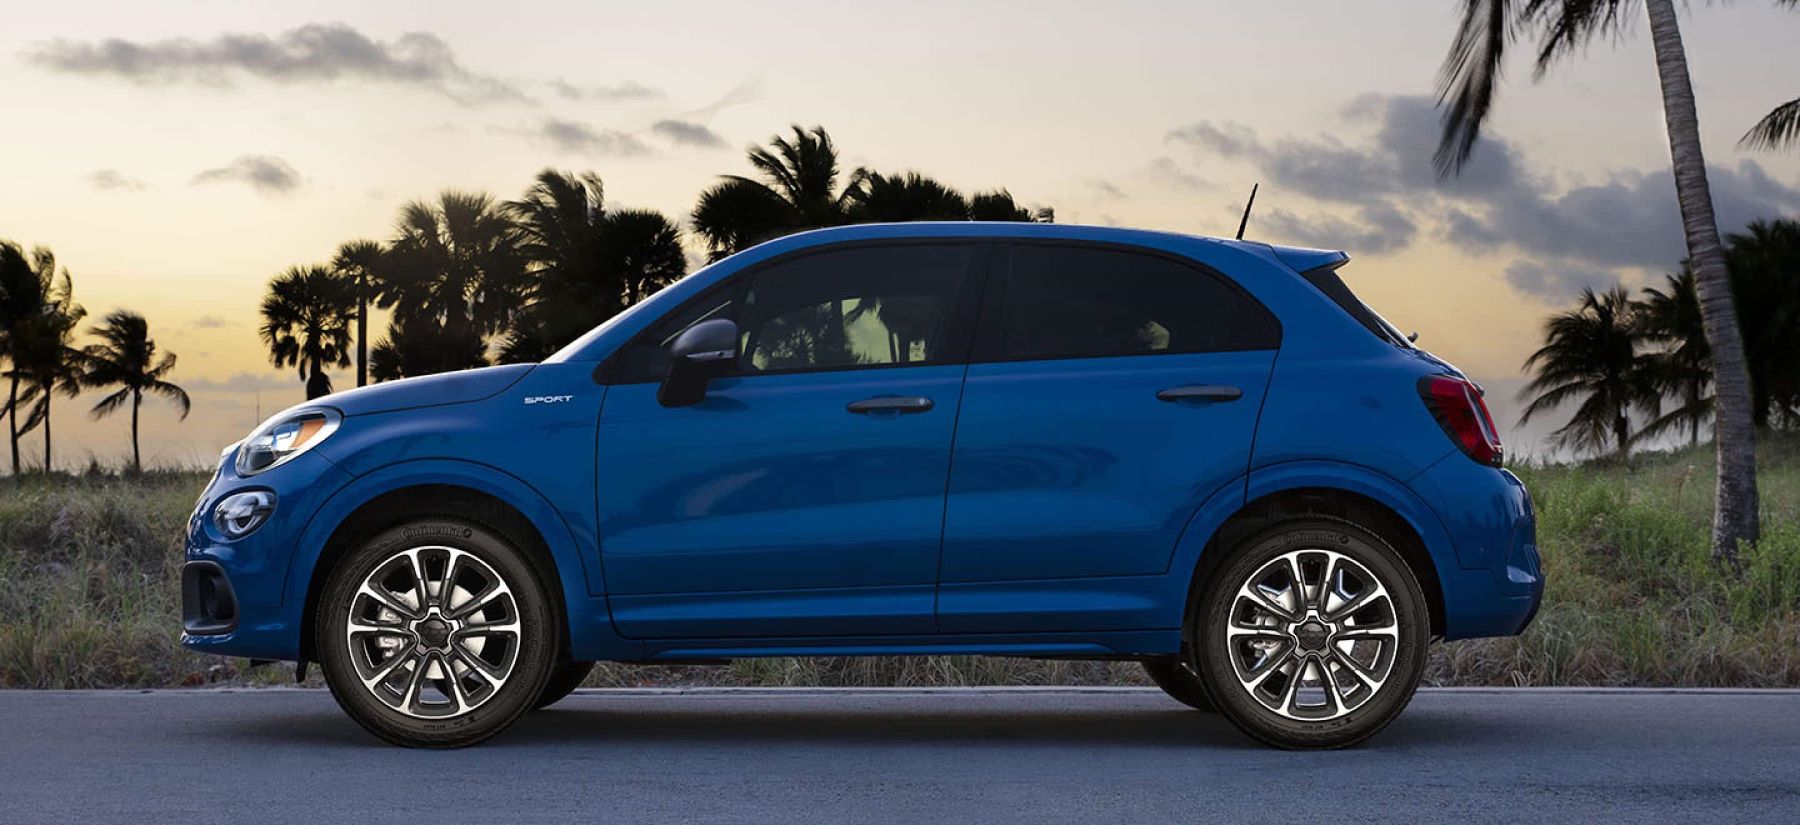 A blue 2022 Fiat 500X subcompact crossover SUV model parked near palm trees at sunset